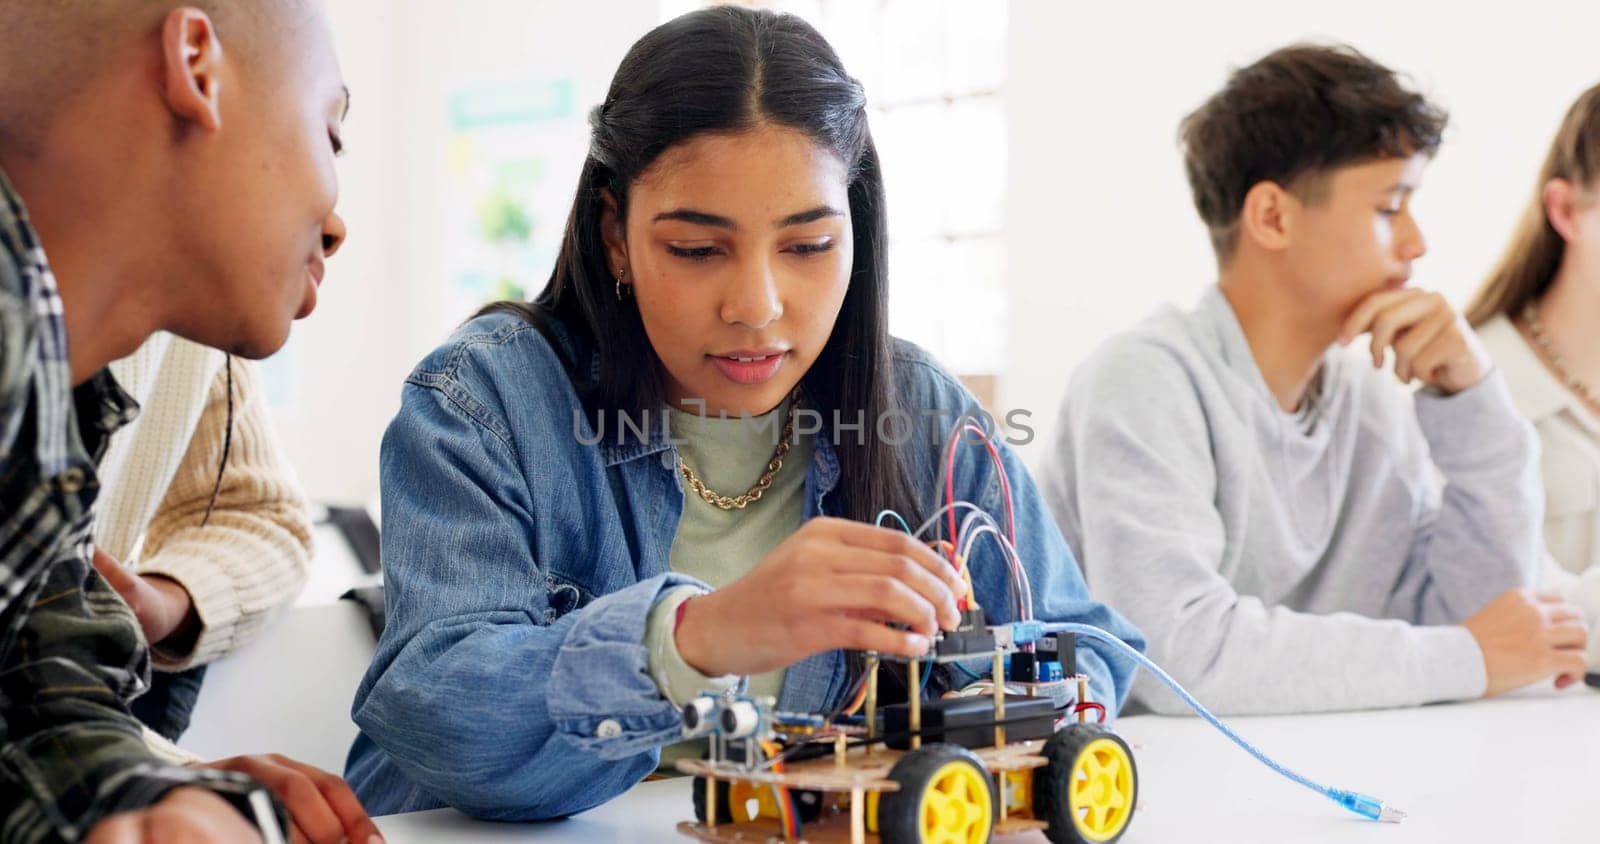 Technology, car robotics and students in classroom, education or learning electronics with car toys for innovation. School kids, learners and transportation knowledge in science class for research by YuriArcurs